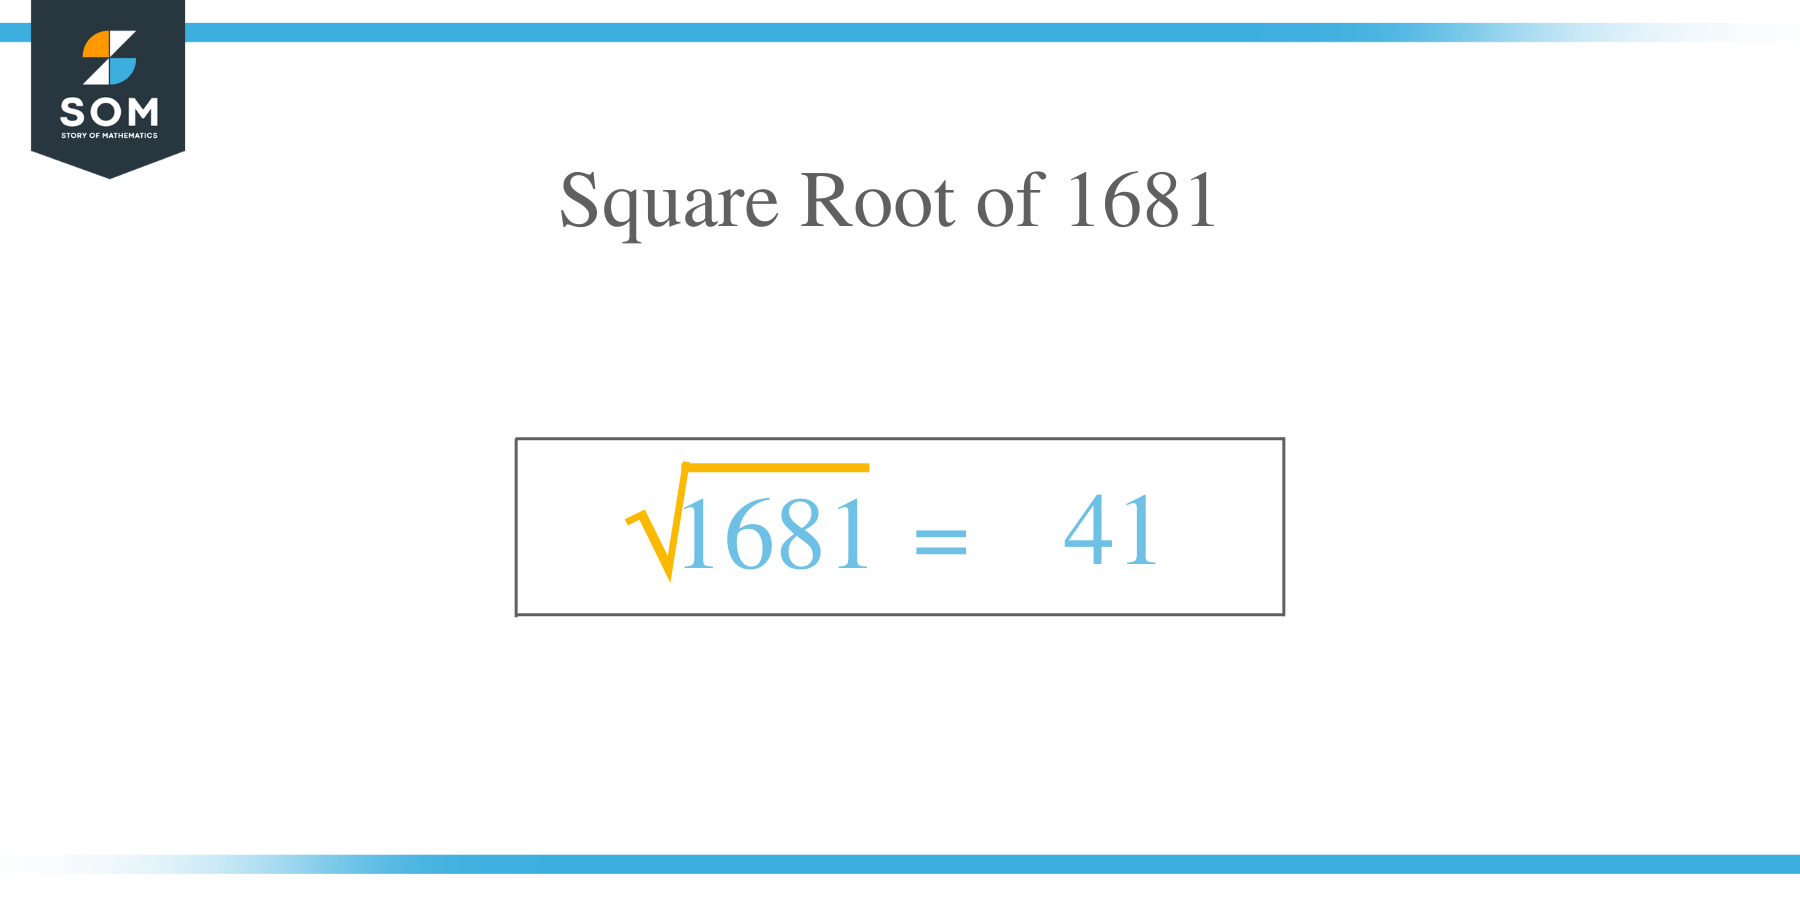 Square Root of 1681